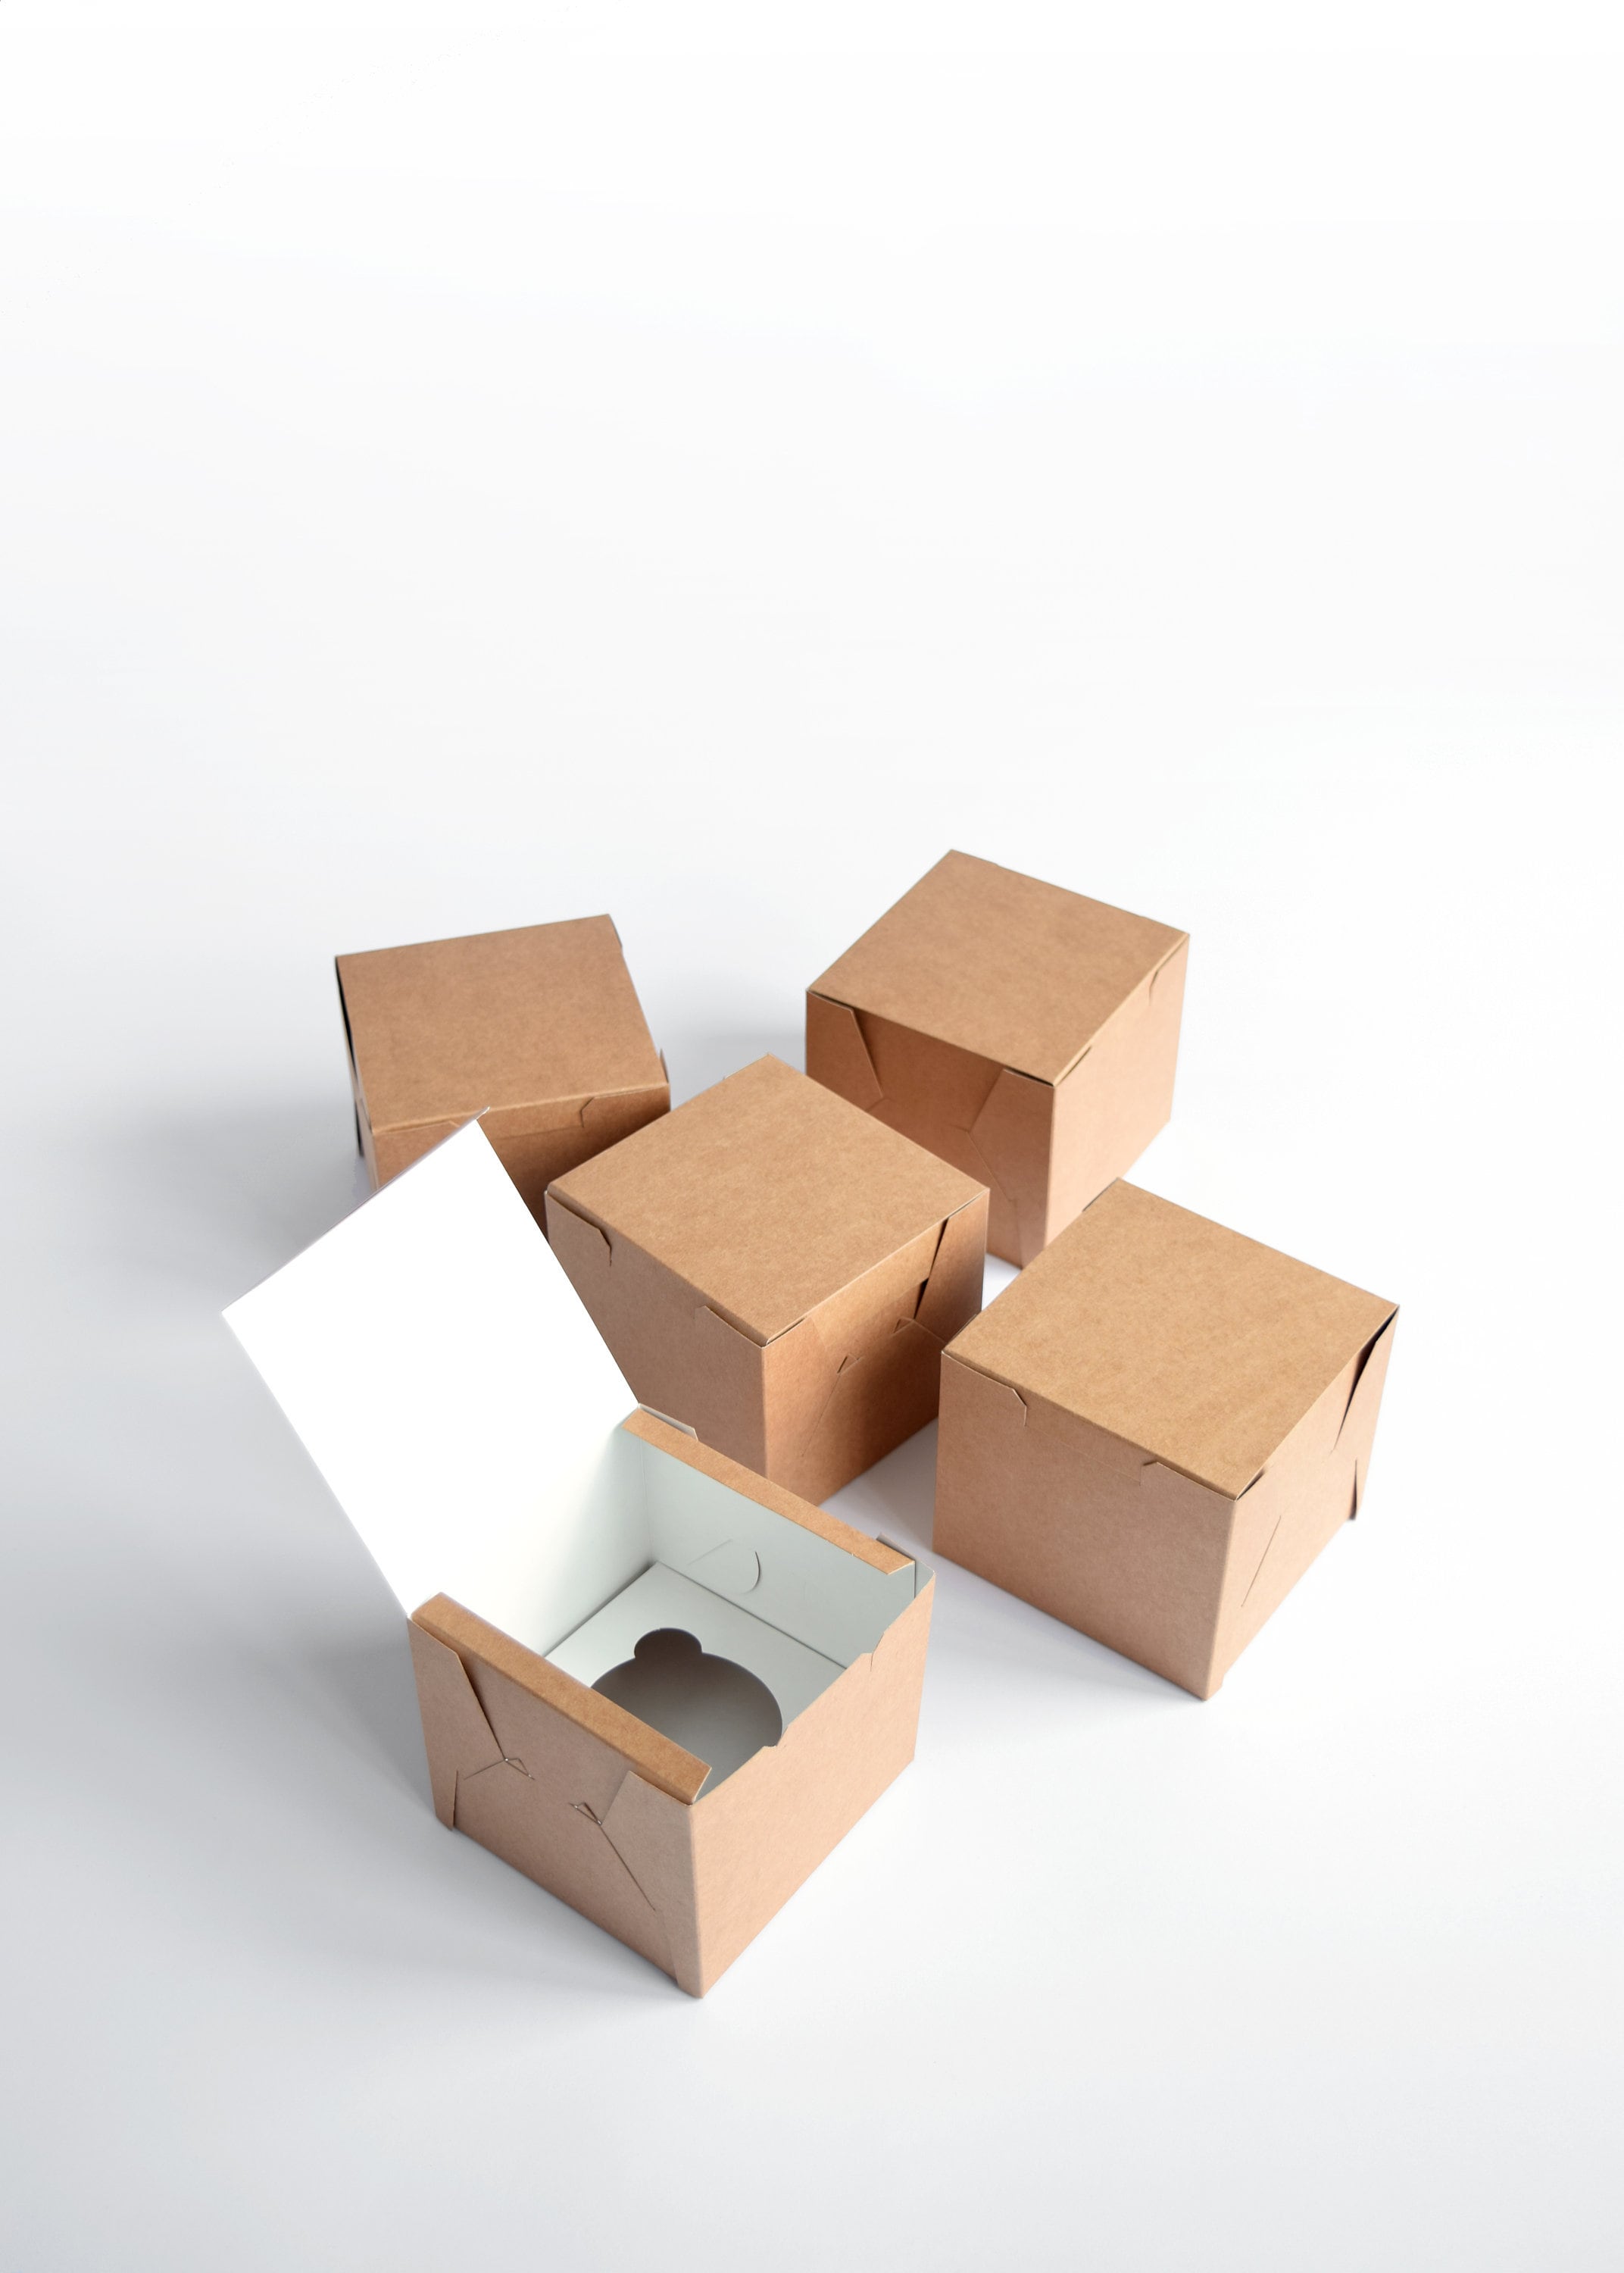 20x Tiny Shipping Boxes, Small Parcel Flat Shipping Boxes, Mailers for  Small Business, Packaging Boxes Wholesale 